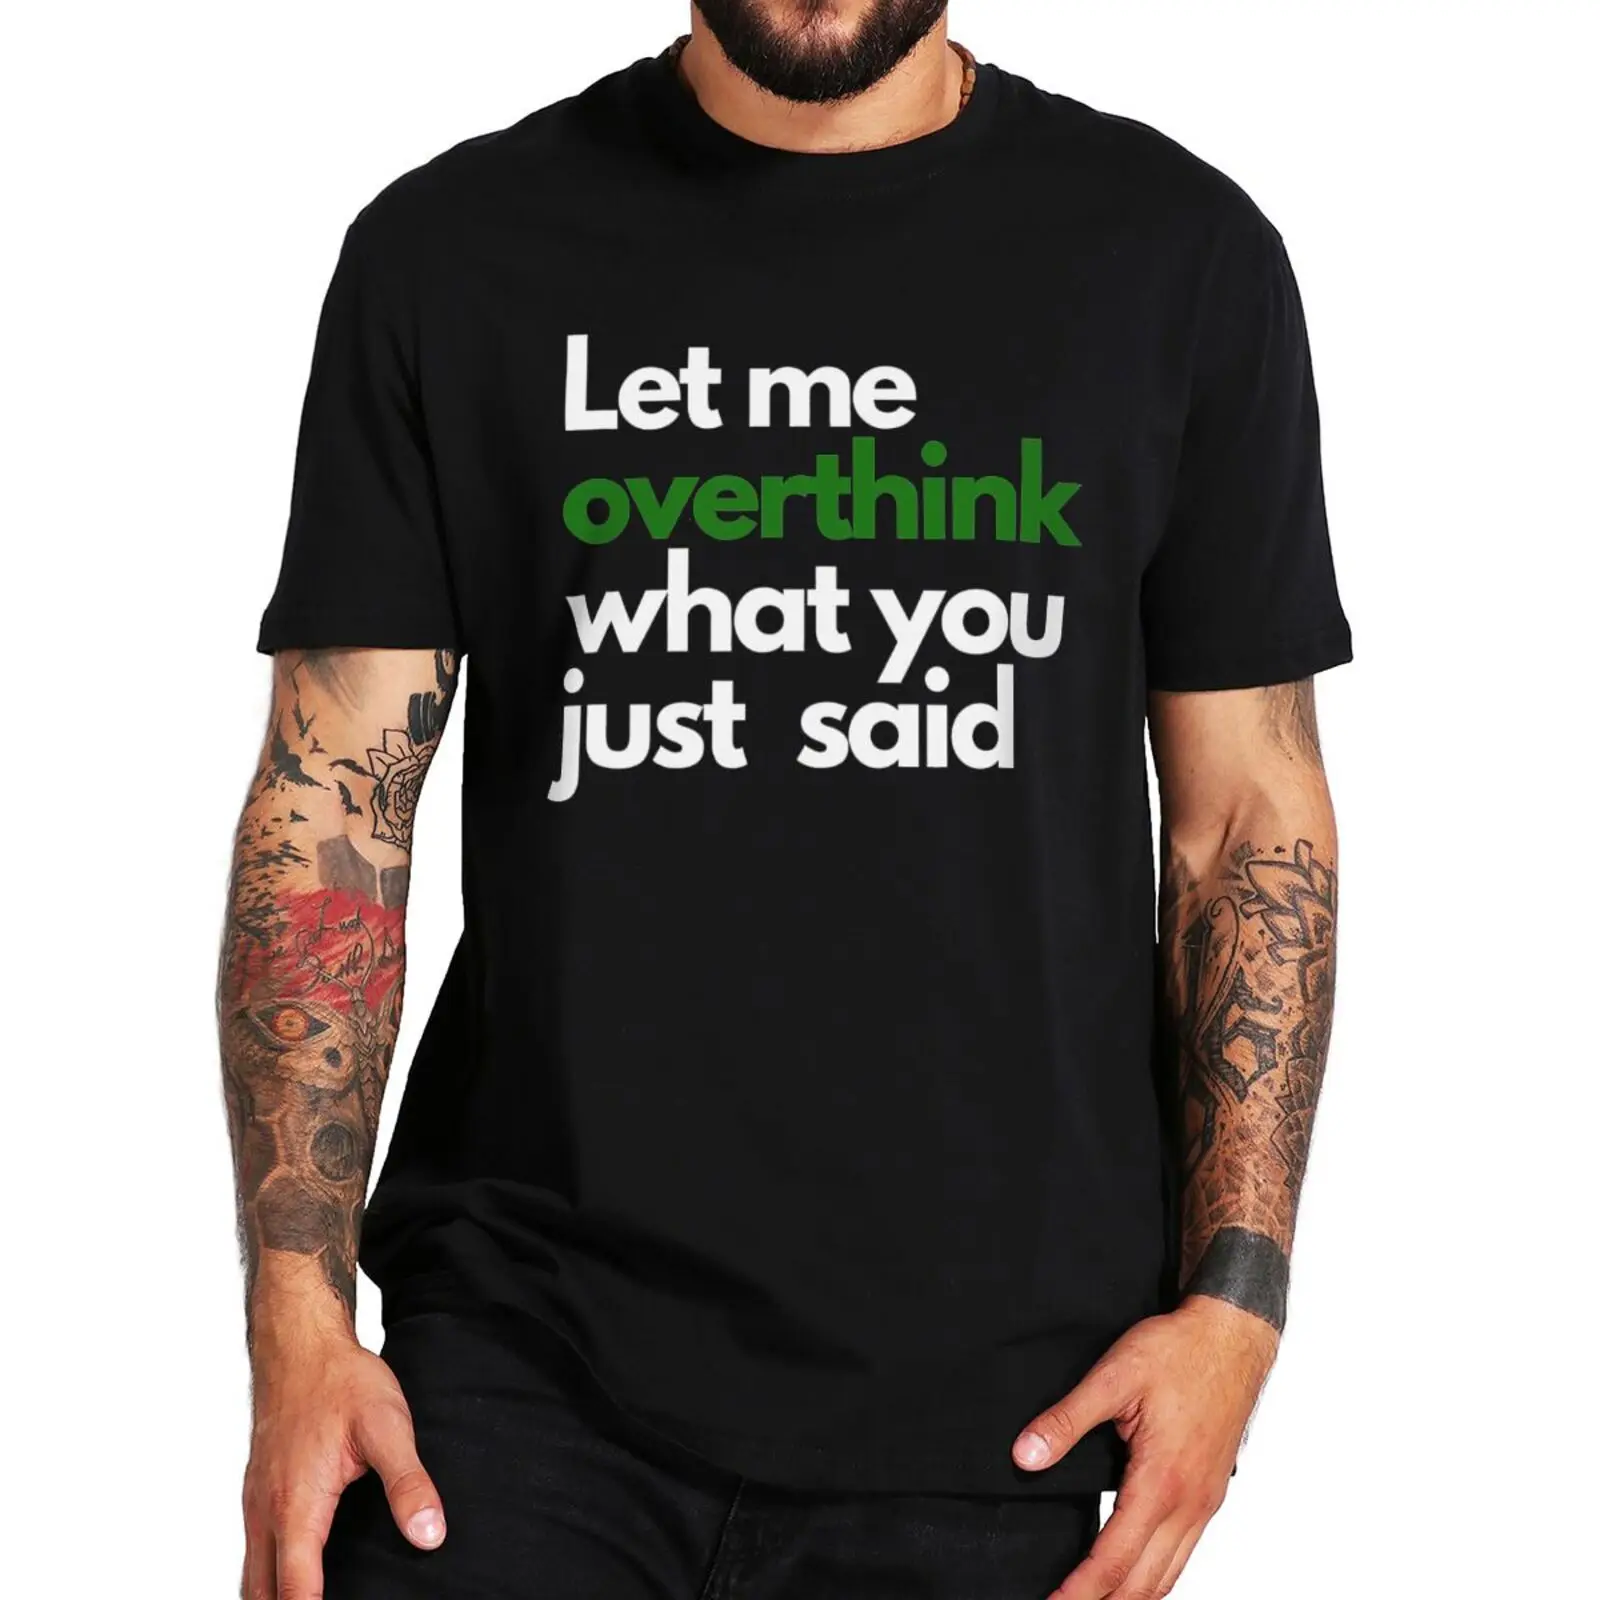 

Let Me Overthink What You Just Said T Shirt Humor Youcanheartit Fans Gift Tee Tops O-neck 100% Cotton Unisex T-shirts EU Size